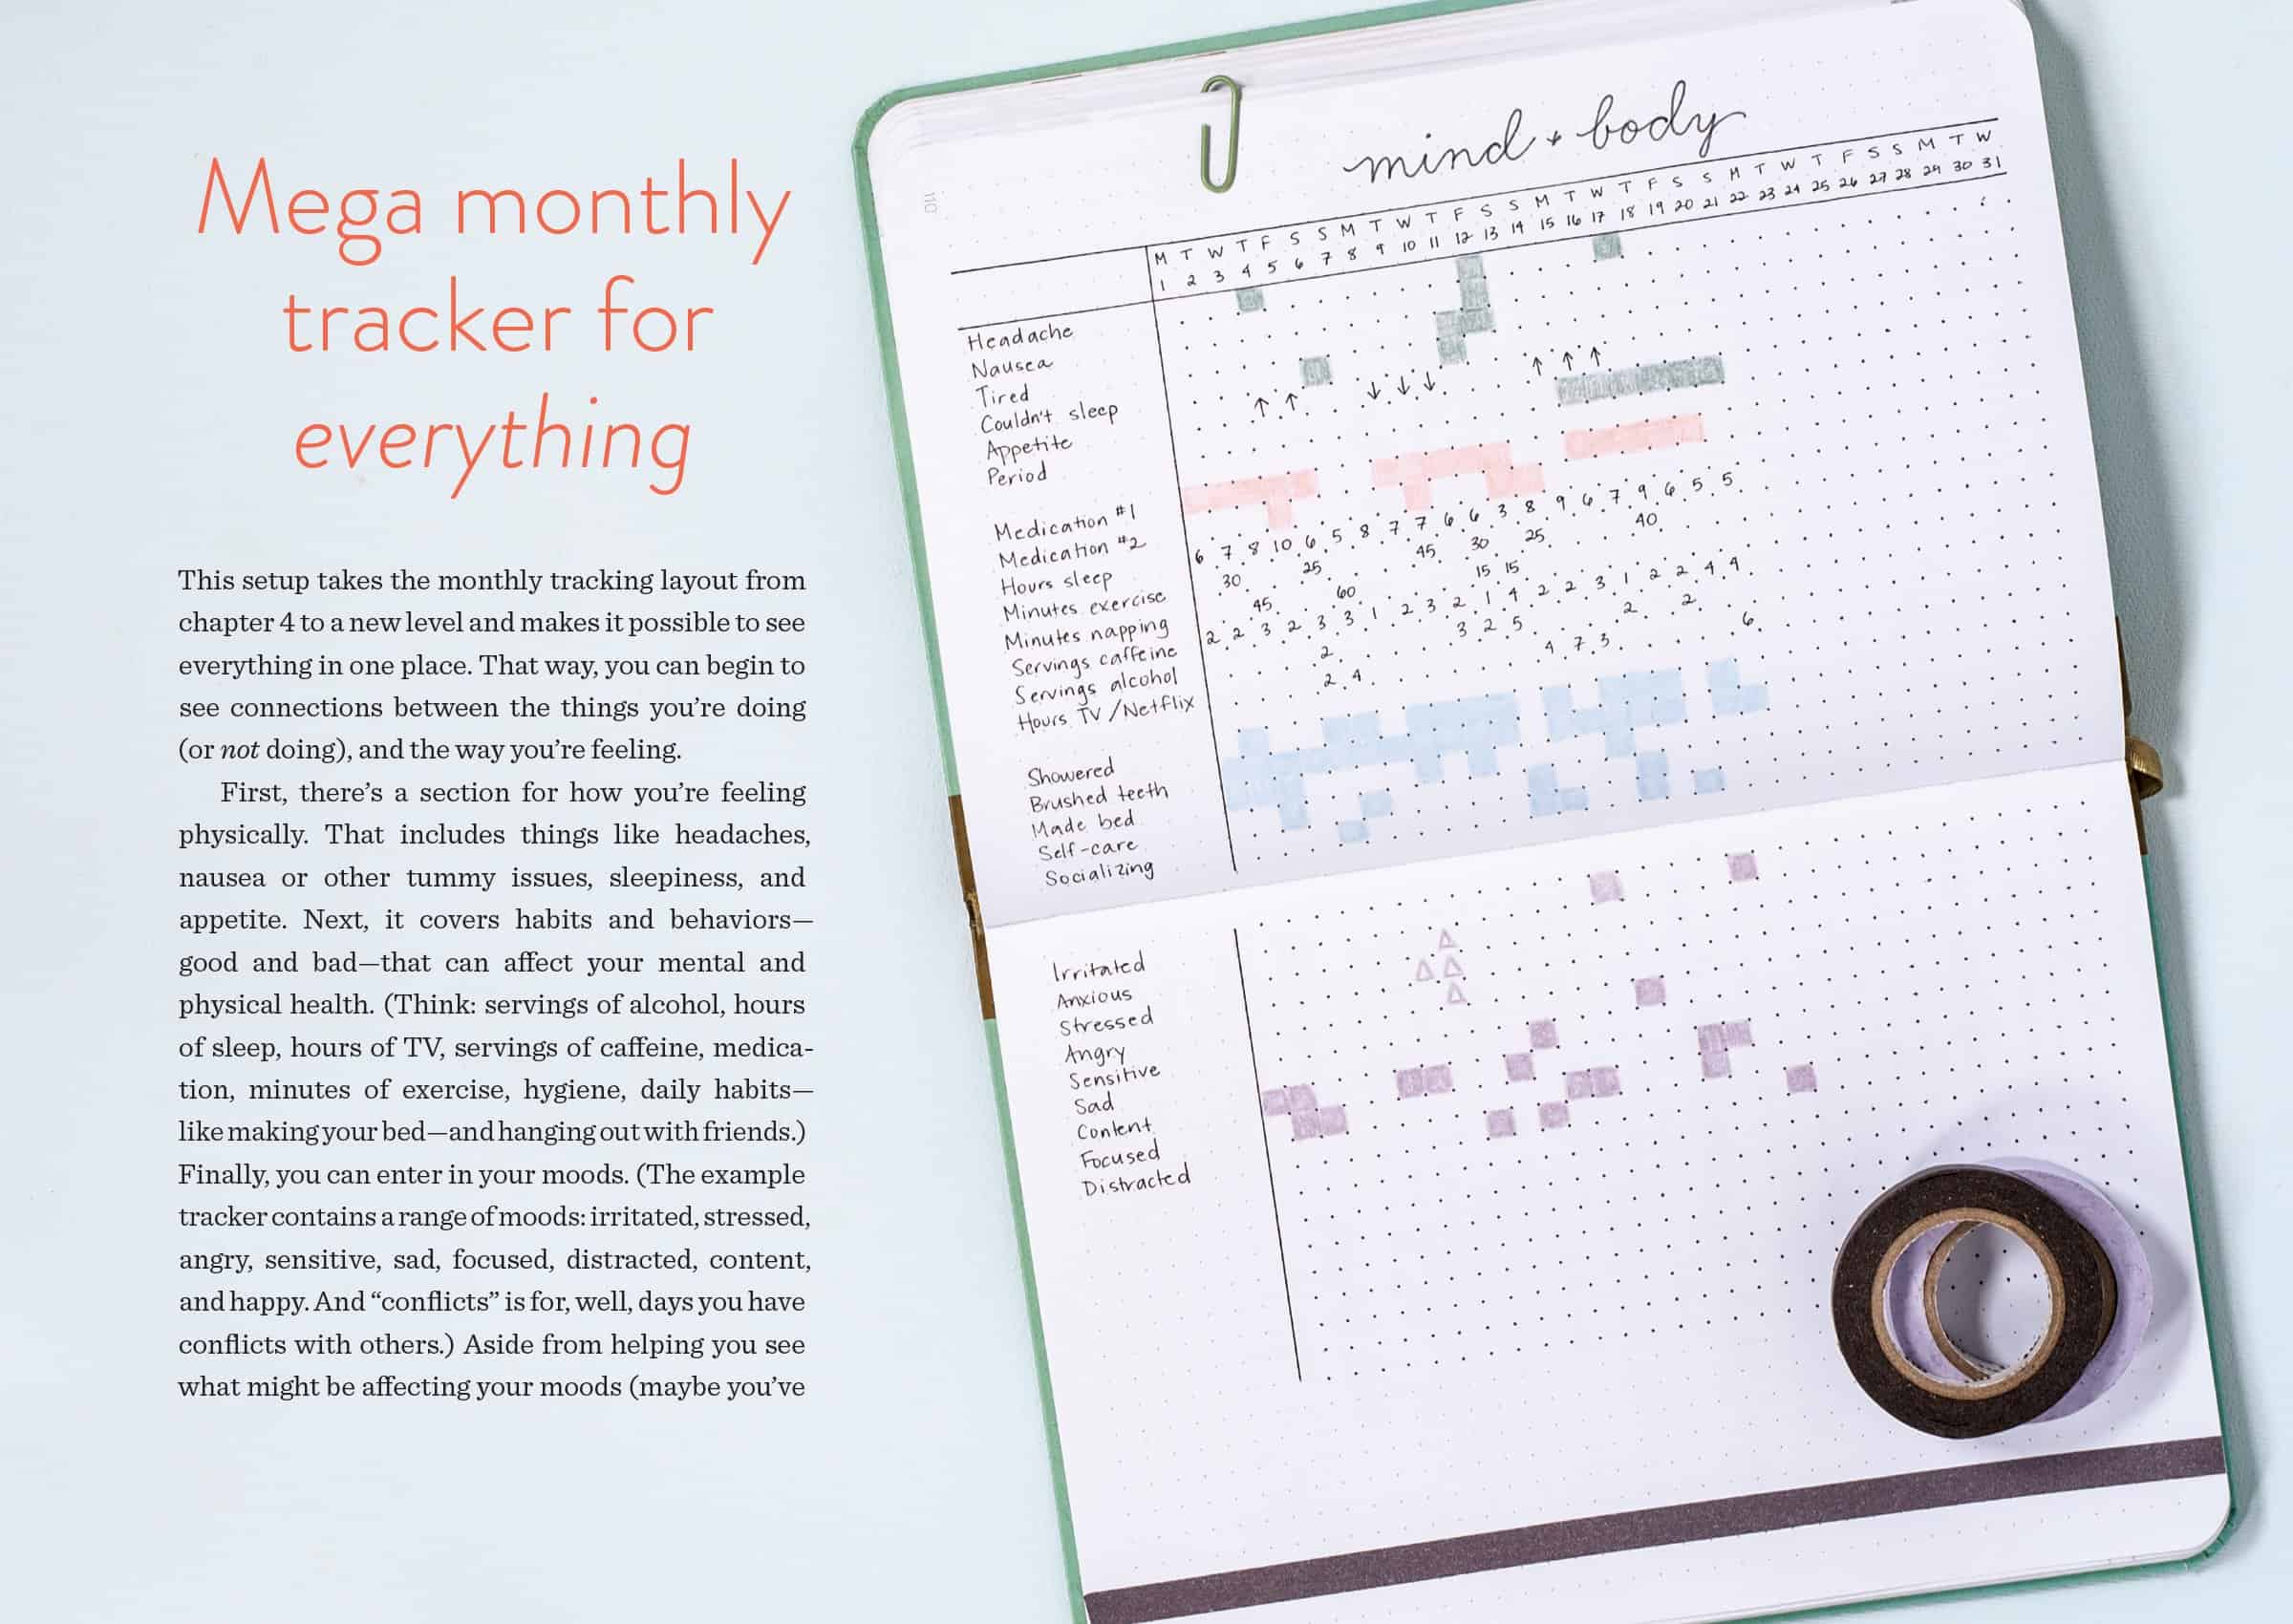 Learn how to start the perfect bullet journal & get your life organized the fun way with Rachel Wilkerson Miller's Dot Journaling: The Set